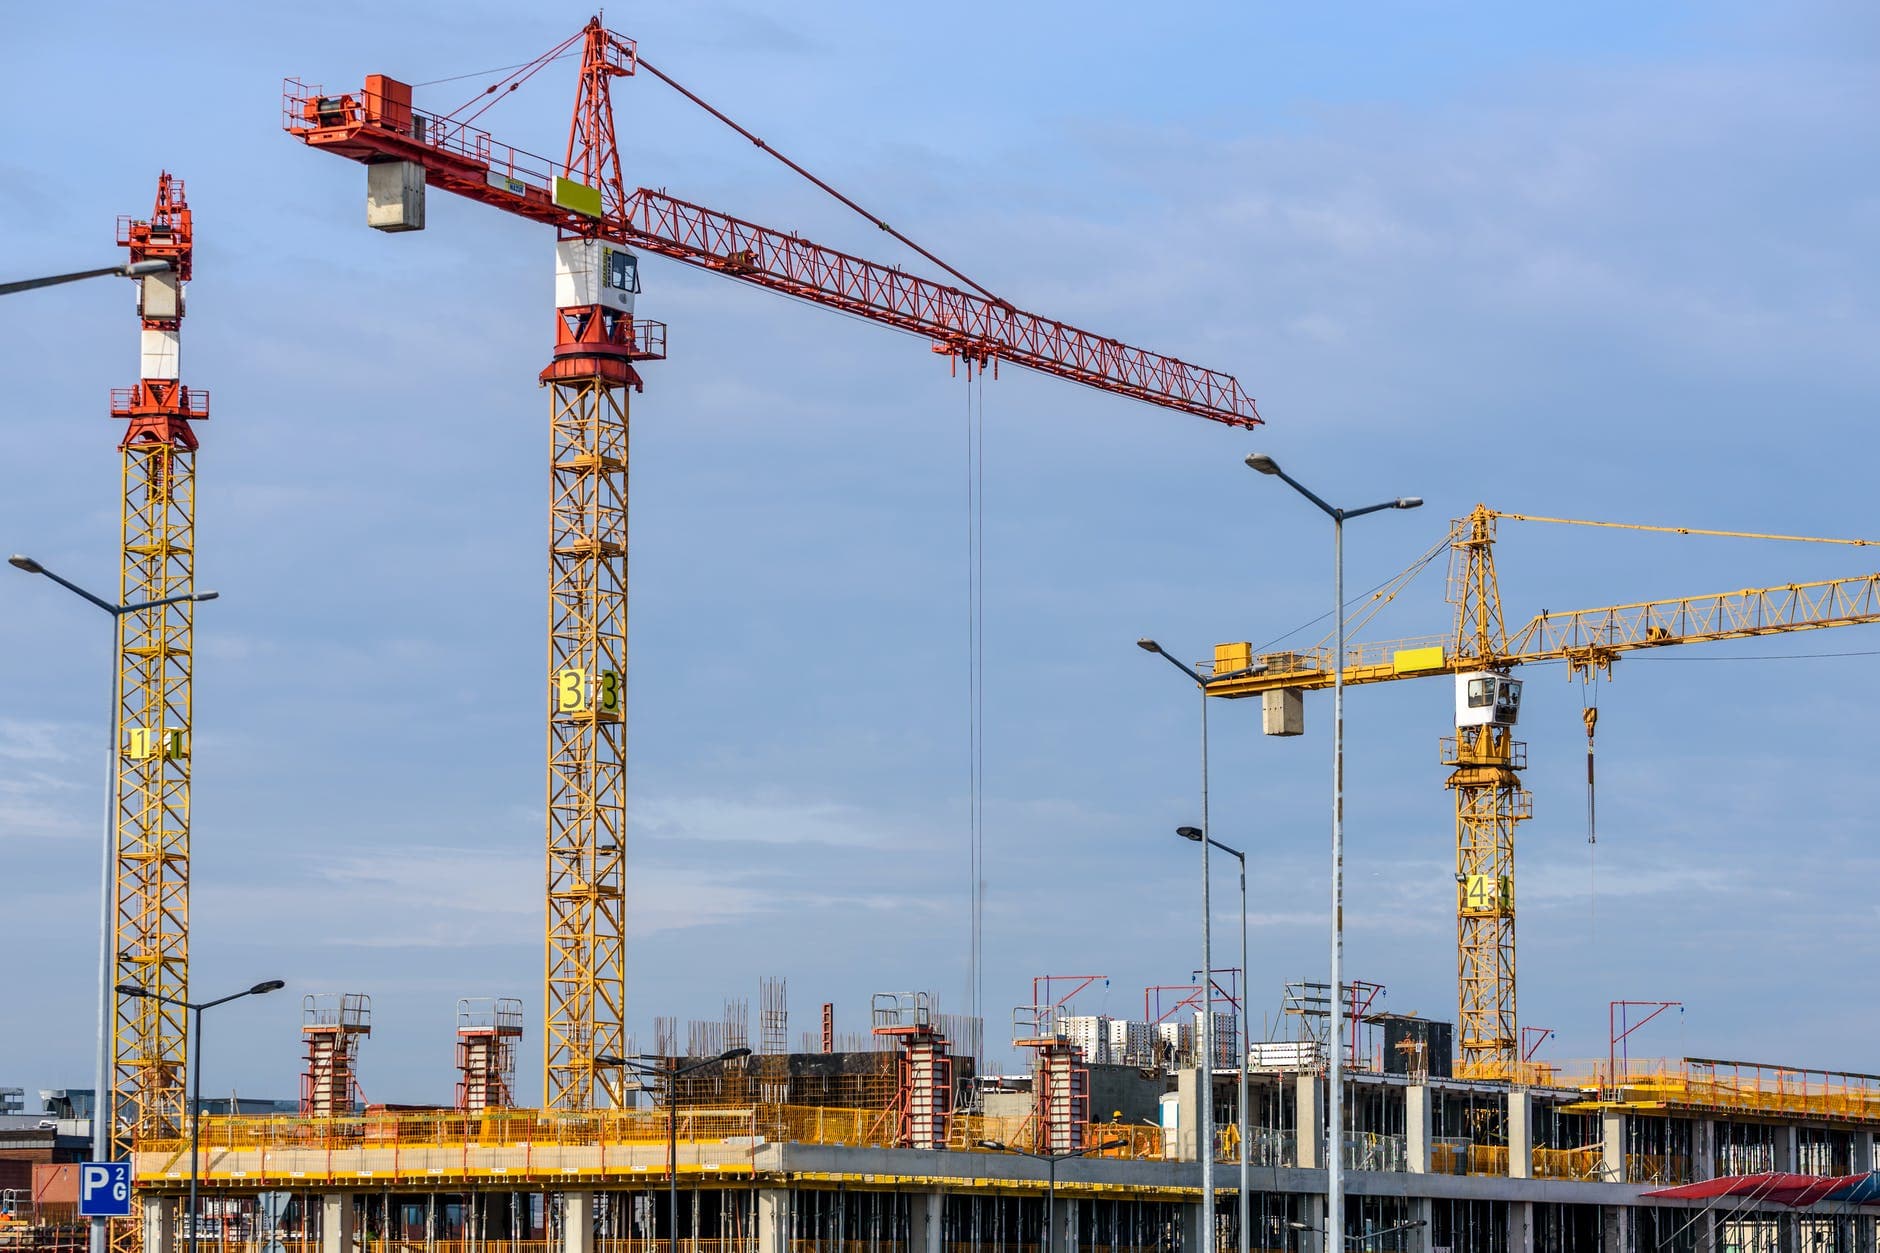 construction site _Contractor: how to pass a safety inspection_RenoQuotes